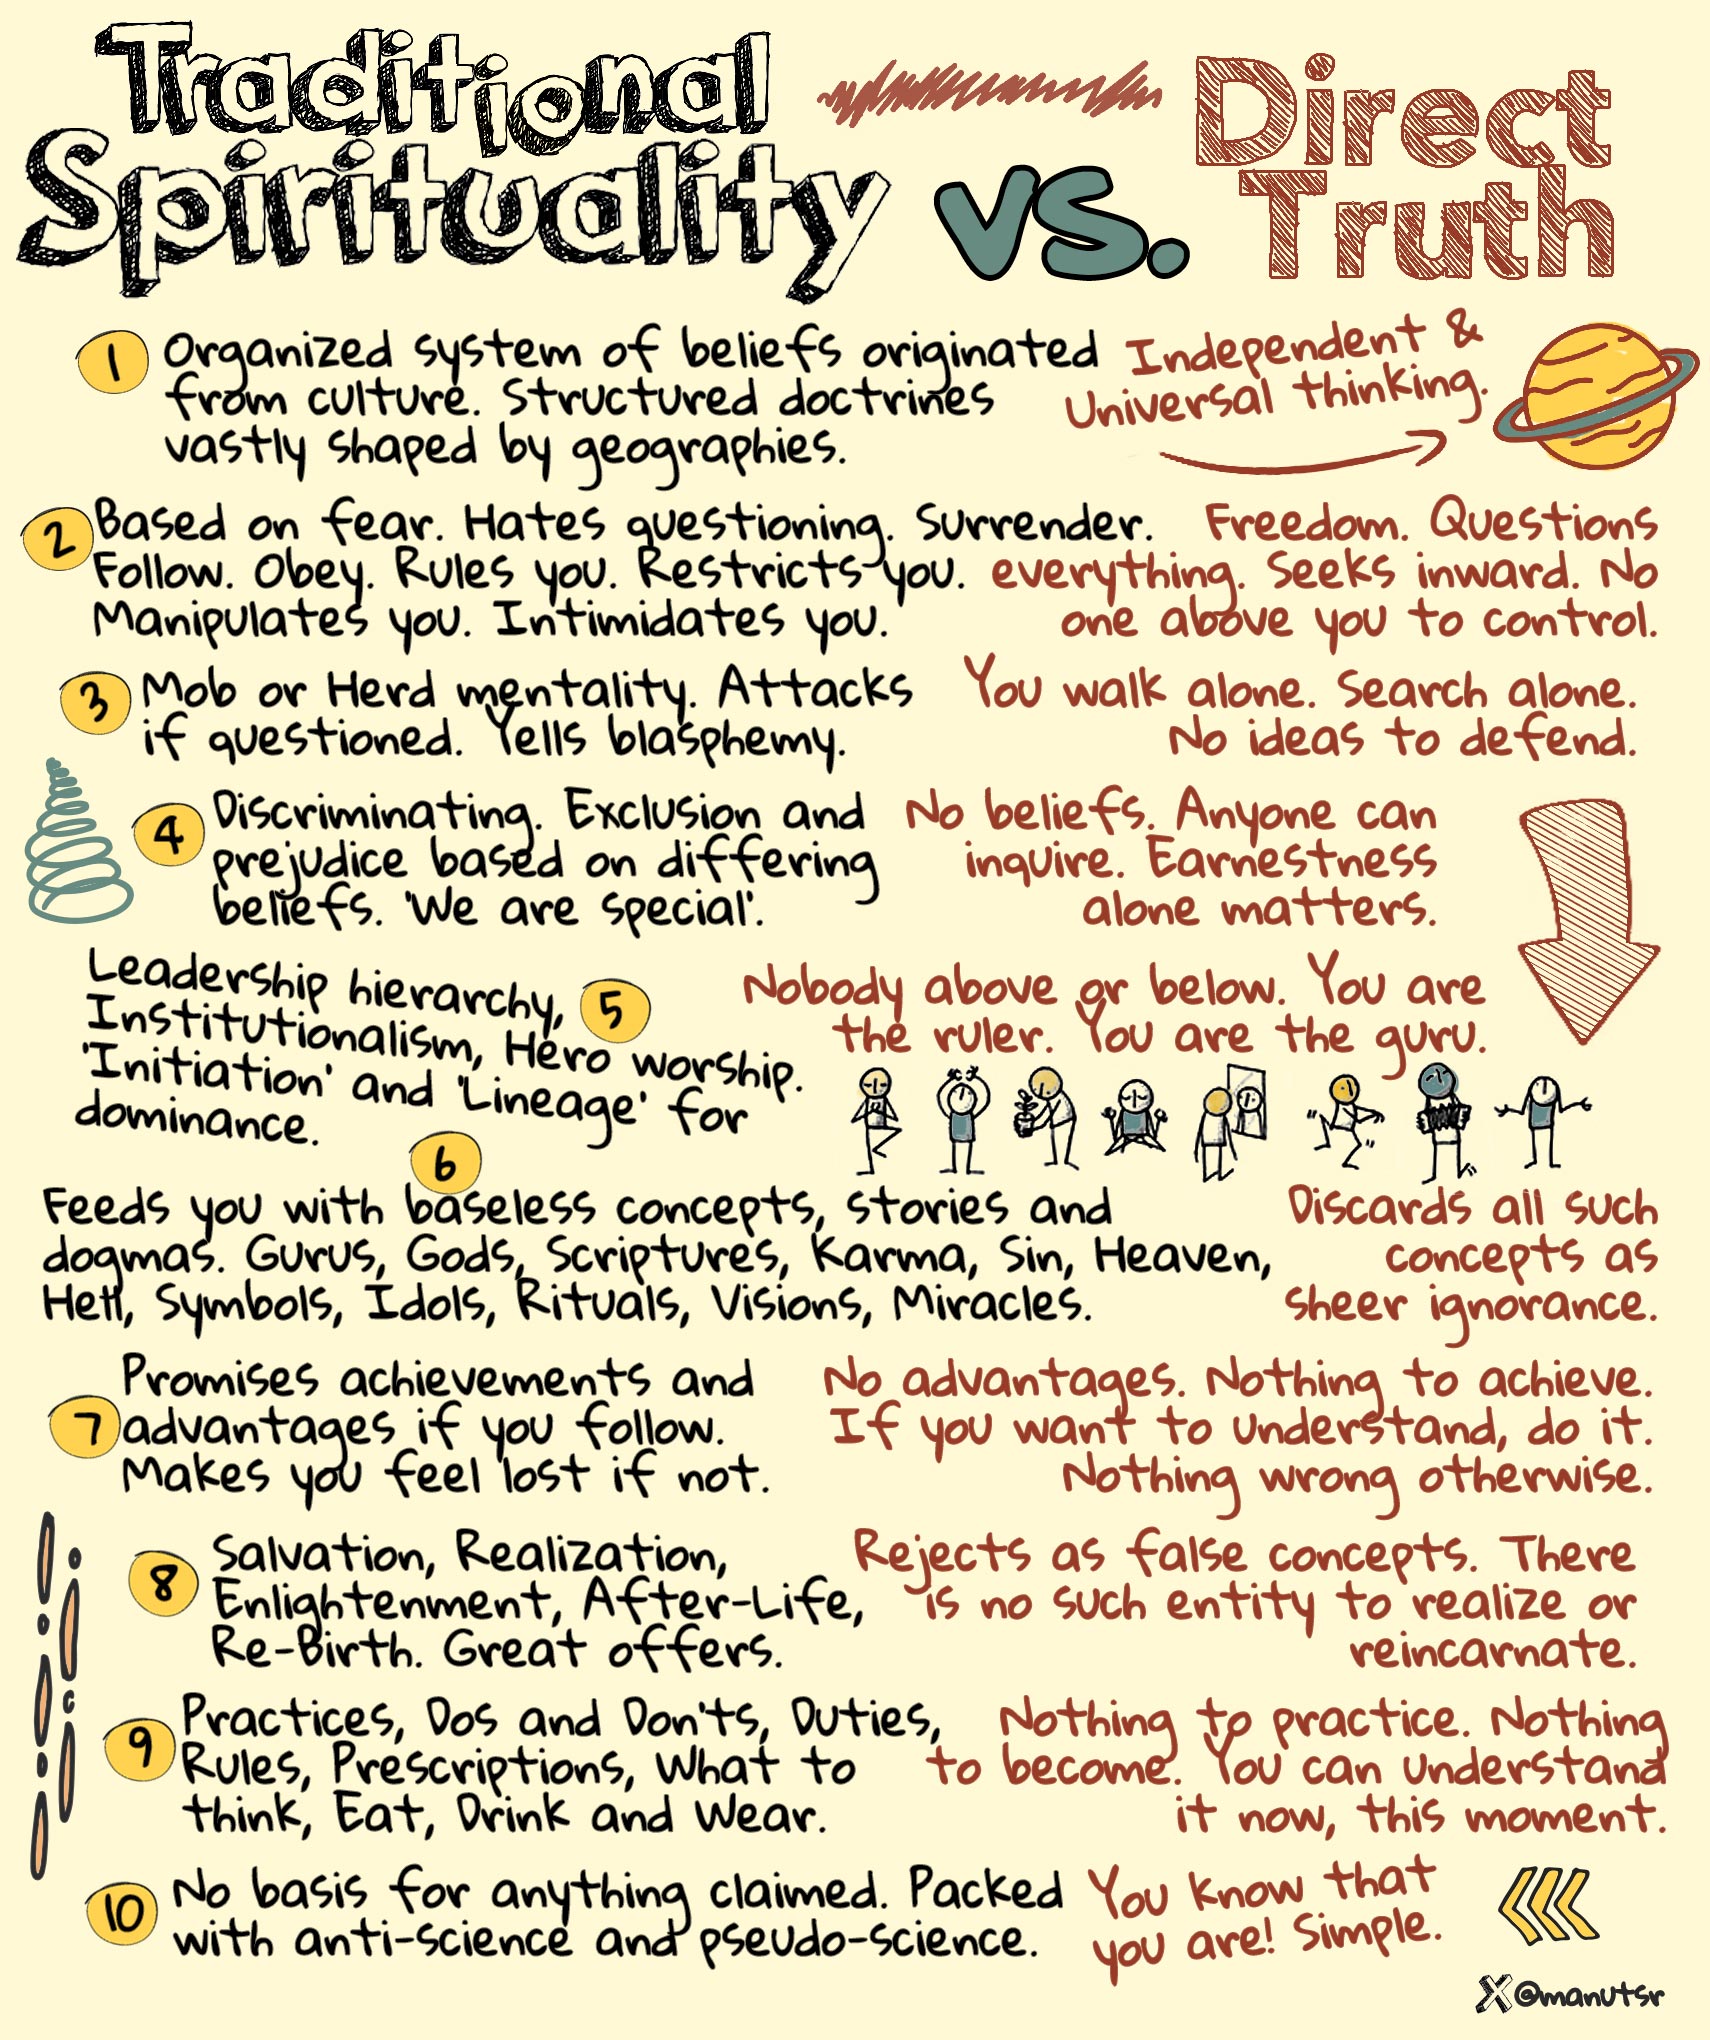 Traditional Spirituality vs. [Direct Truth] 1 Organized system of beliefs originated from culture. Structured doctrines vastly shaped by geographies. [Independent & Universal thinking.] 2 Based on fear. Hates questioning. Surrender. Follow. Obey. Rules you. Restricts you. Manipulates you. Intimidates you. [Freedom. Questions everything. Seeks inward. No one above you to control.] 3 Mob or Herd mentality. Attacks if questioned. Yells blasphemy. [You walk alone. Search alone. No ideas to defend.] 4 Discriminating. Exclusion and prejudice based on differing beliefs. 'We are special'. [No beliefs. Anyone can inquire. Earnestness alone matters.] 5 Leadership hierarchy, Institutionalism, Hero worship. 'Initiation' and 'Lineage' for dominance. [Nobody above or below. You are the ruler. You are the guru.] 6 Feeds you with baseless concepts, stories and dogmas. Gurus, Gods, Scriptures, Karma, Sin, Heaven, Hell, Symbols, Idols, Rituals, Visions, Miracles. [Discards all such concepts as sheer ignorance.] 7 Promises achievements and advantages if you follow. Makes you feel lost if not. [No advantages. Nothing to achieve. If you want to understand, do it. Nothing wrong otherwise.] 8 Salvation, Realization, Enlightenment, After-Life, Re-Birth. Great offers.[Rejects as false concepts. There is no such entity to realize or reincarnate.] 9 Practices, Dos and Don'ts, Duties, Rules, Prescriptions, What to think, Eat, Drink and Wear.[Nothing to practice. Nothing to become. You can understand it now, this moment.] 10 No basis for anything claimed. Packed with anti-science and pseudo-science.[You know that you are! Simple.]